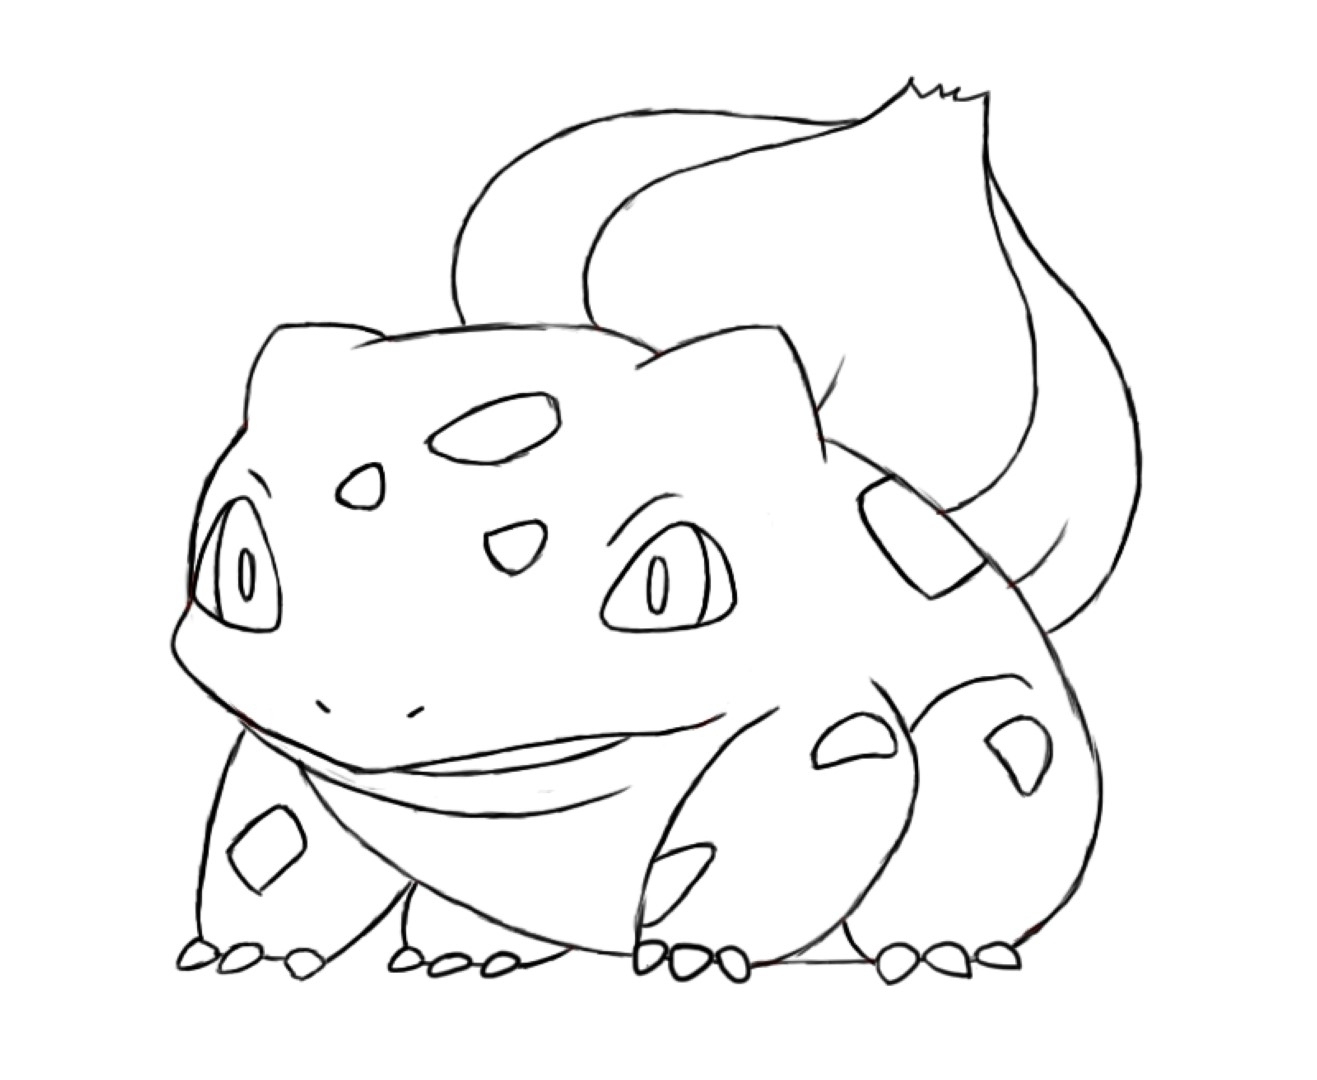 Bulbasaur Coloring Page At Getdrawings | Free Download intérieur Coloriage Pokemon Bulbizar